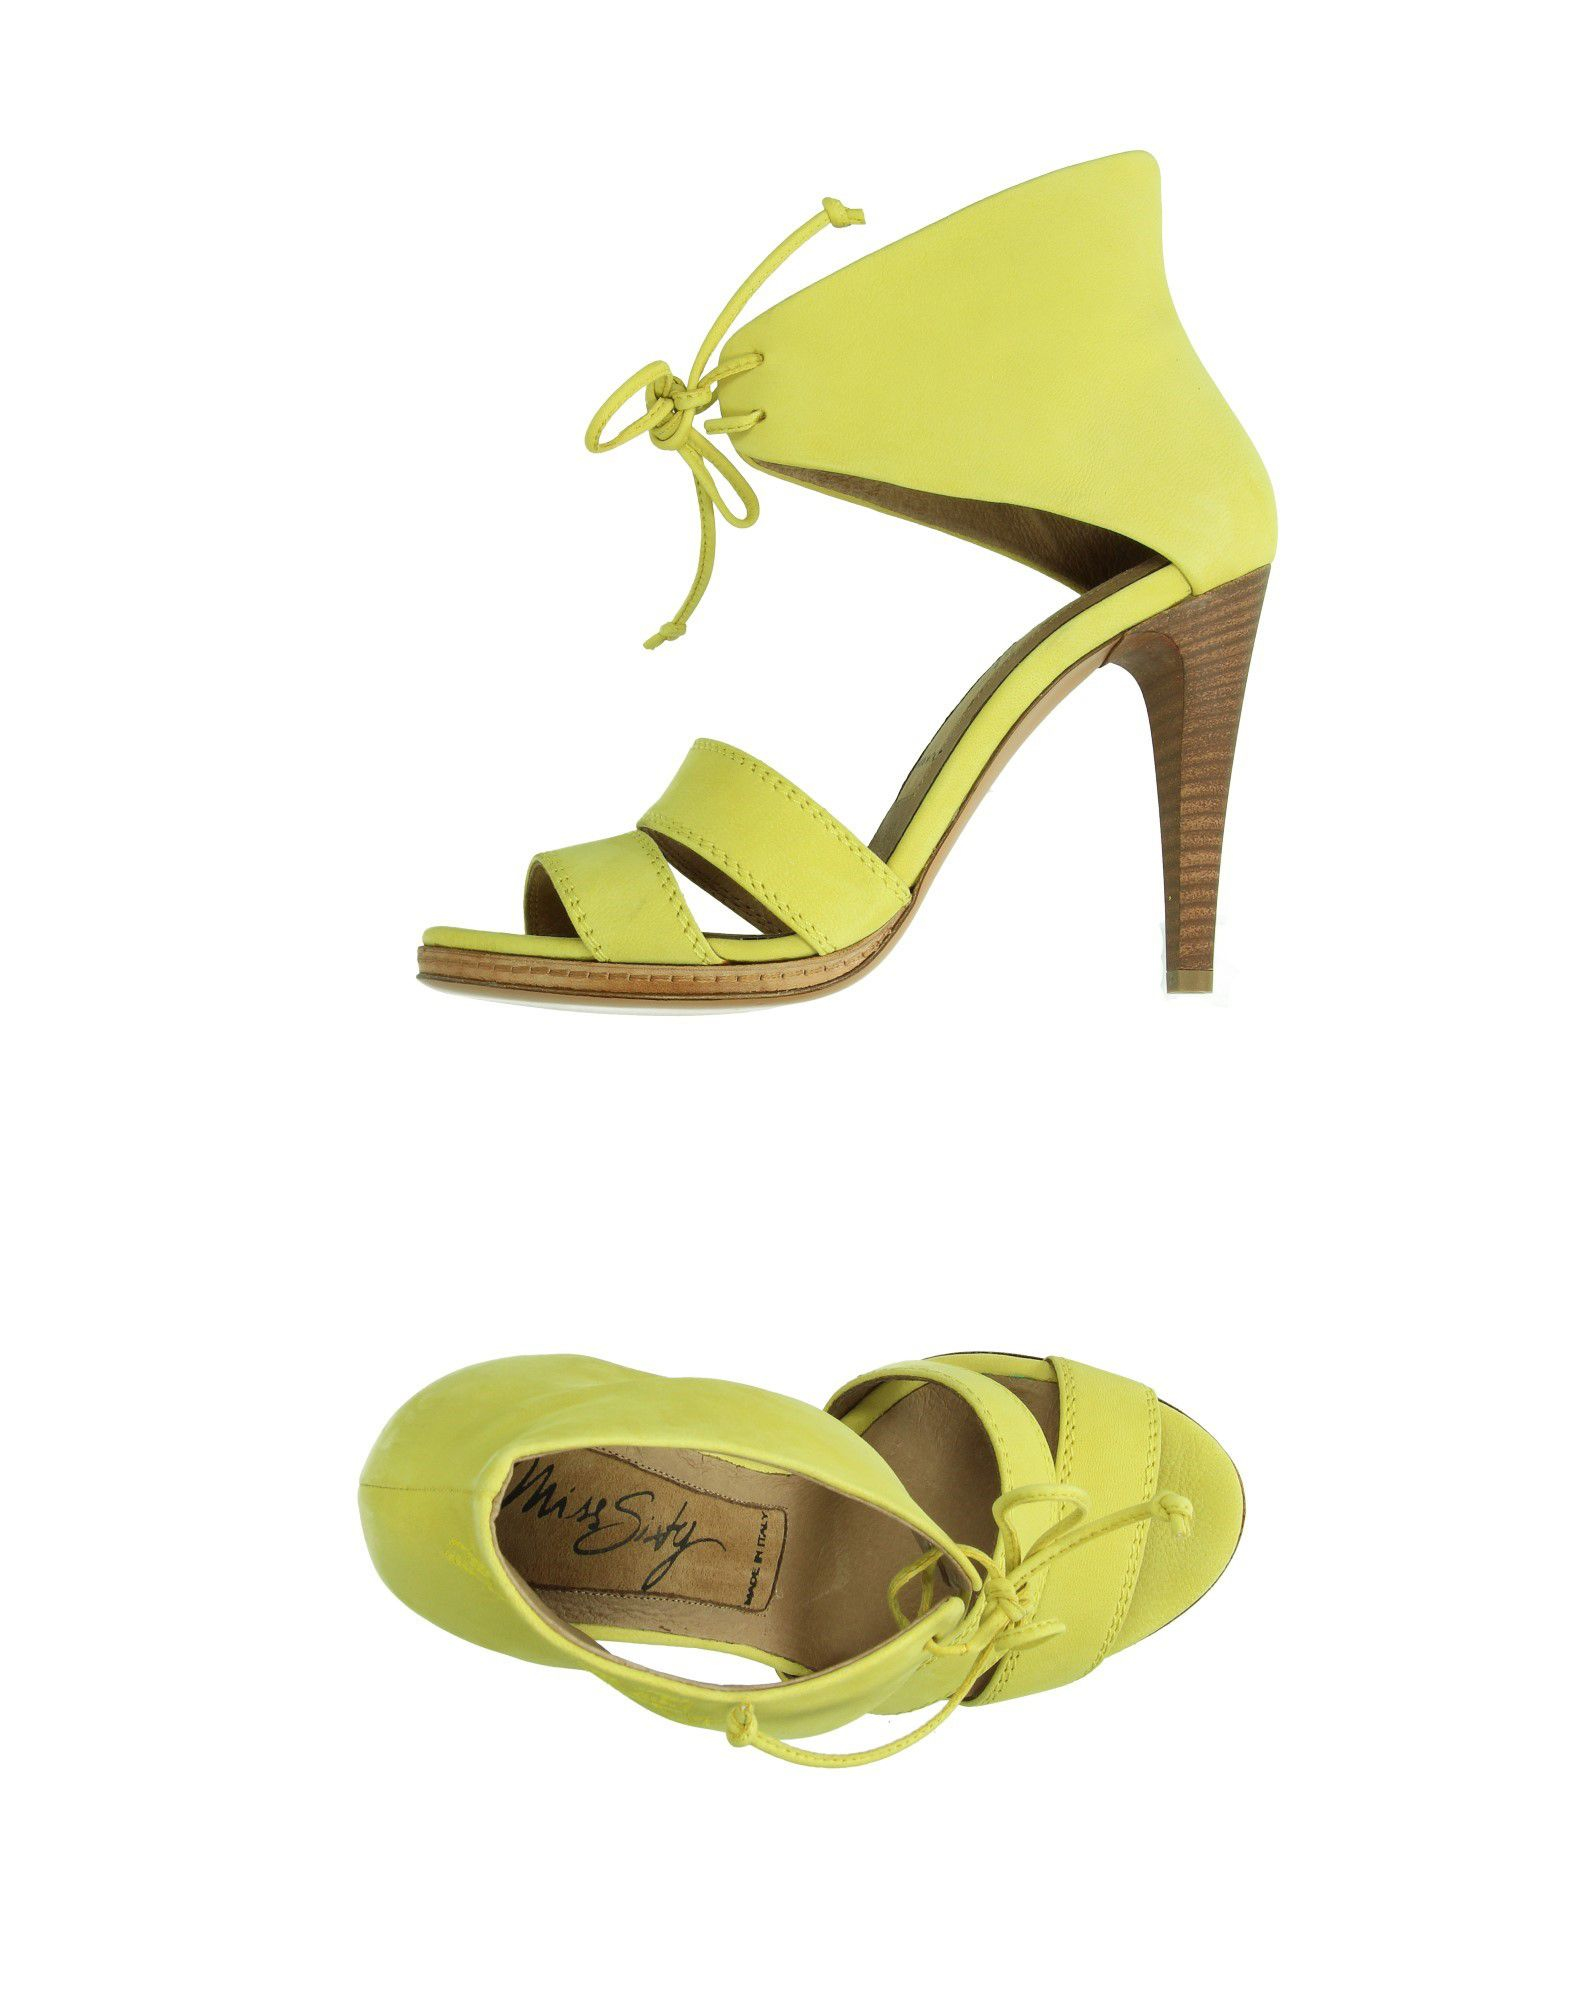 Miss Sixty Leather Sandals in Yellow - Lyst